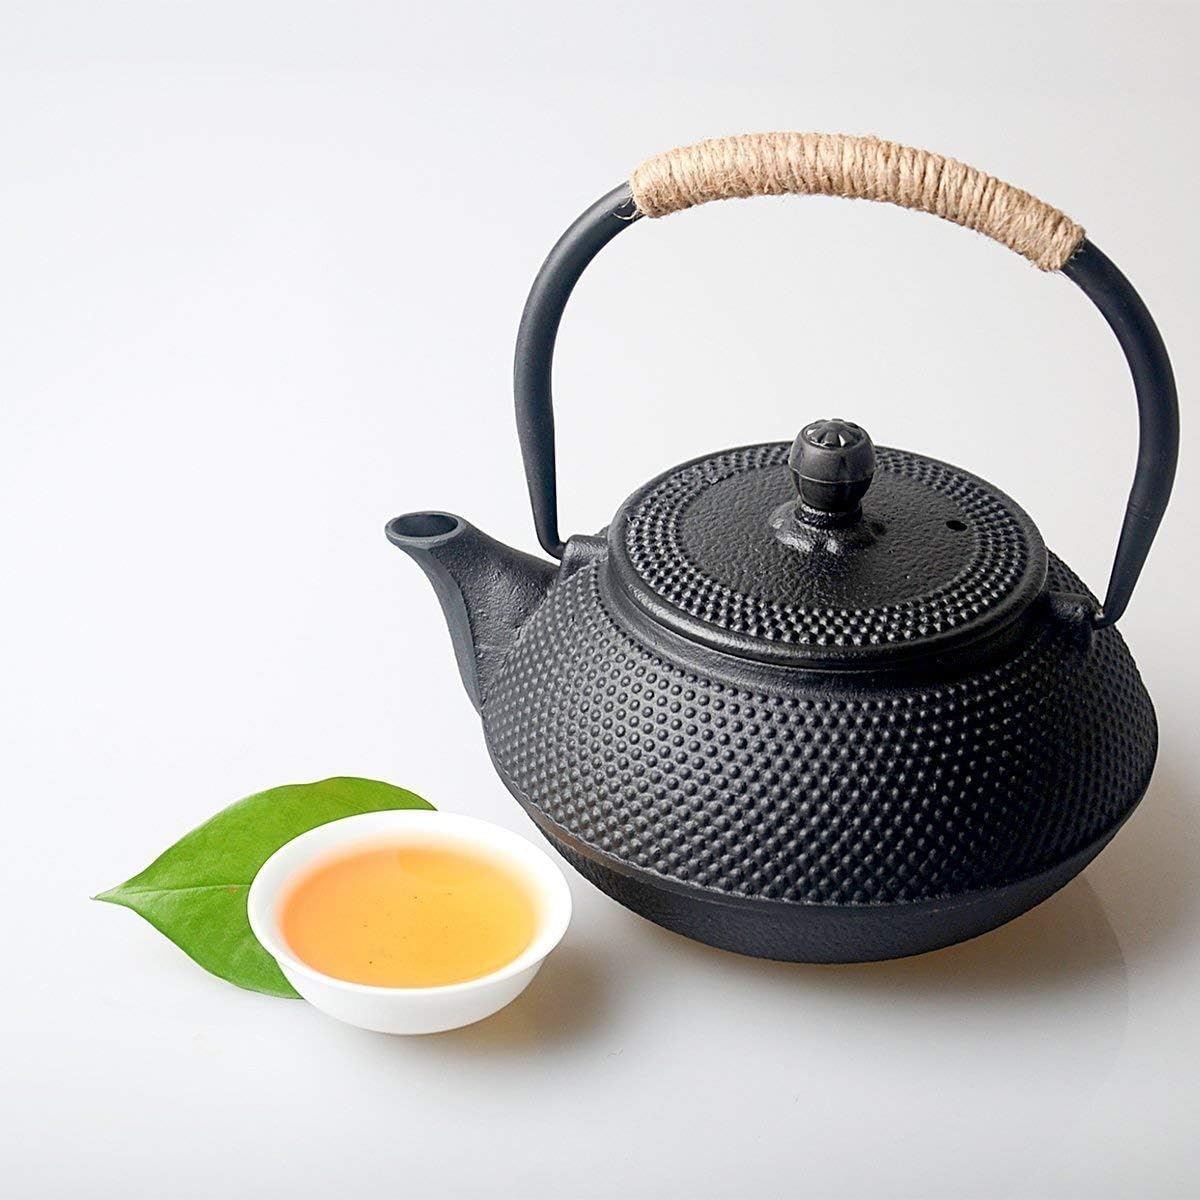 HwaGui Japanese Cast Iron Teapot with Tea Strainer for Loose Tea, 600ml